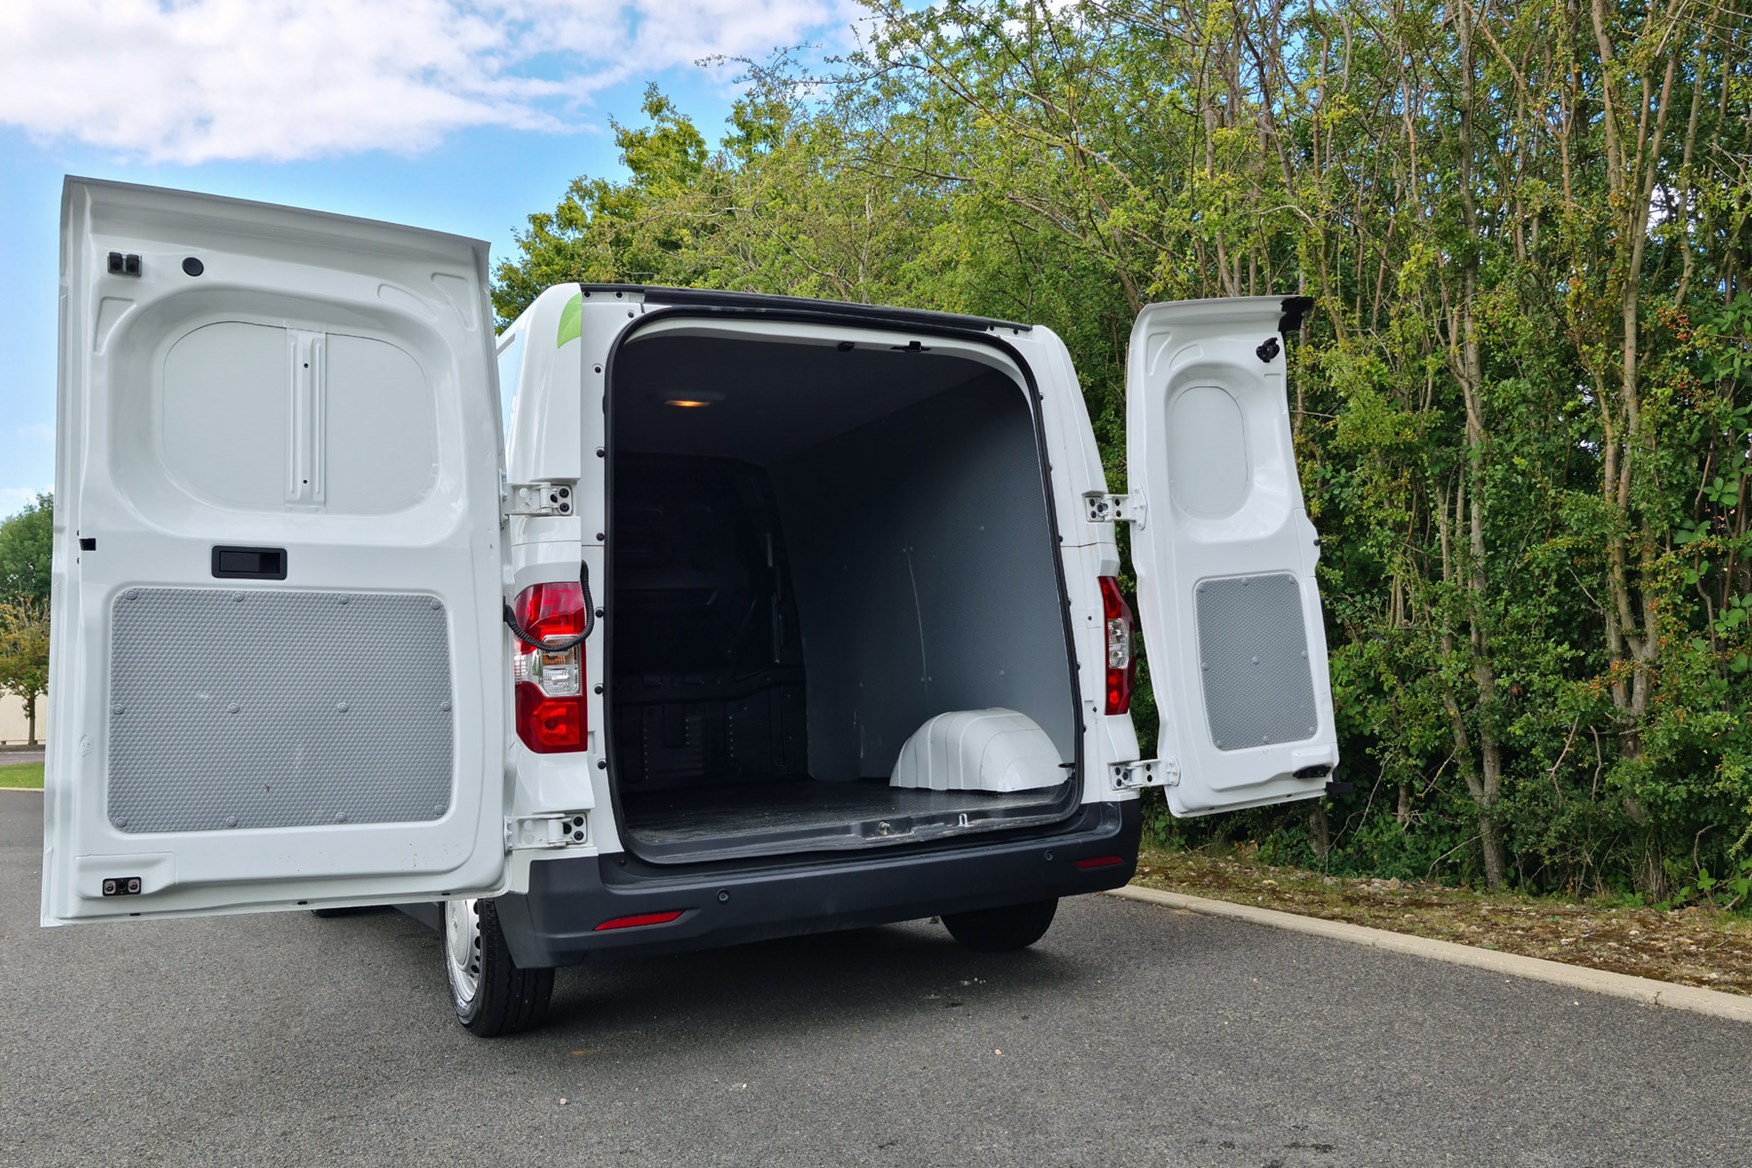 Maxus e Deliver 3 payload capacity, white, rear view, doors open